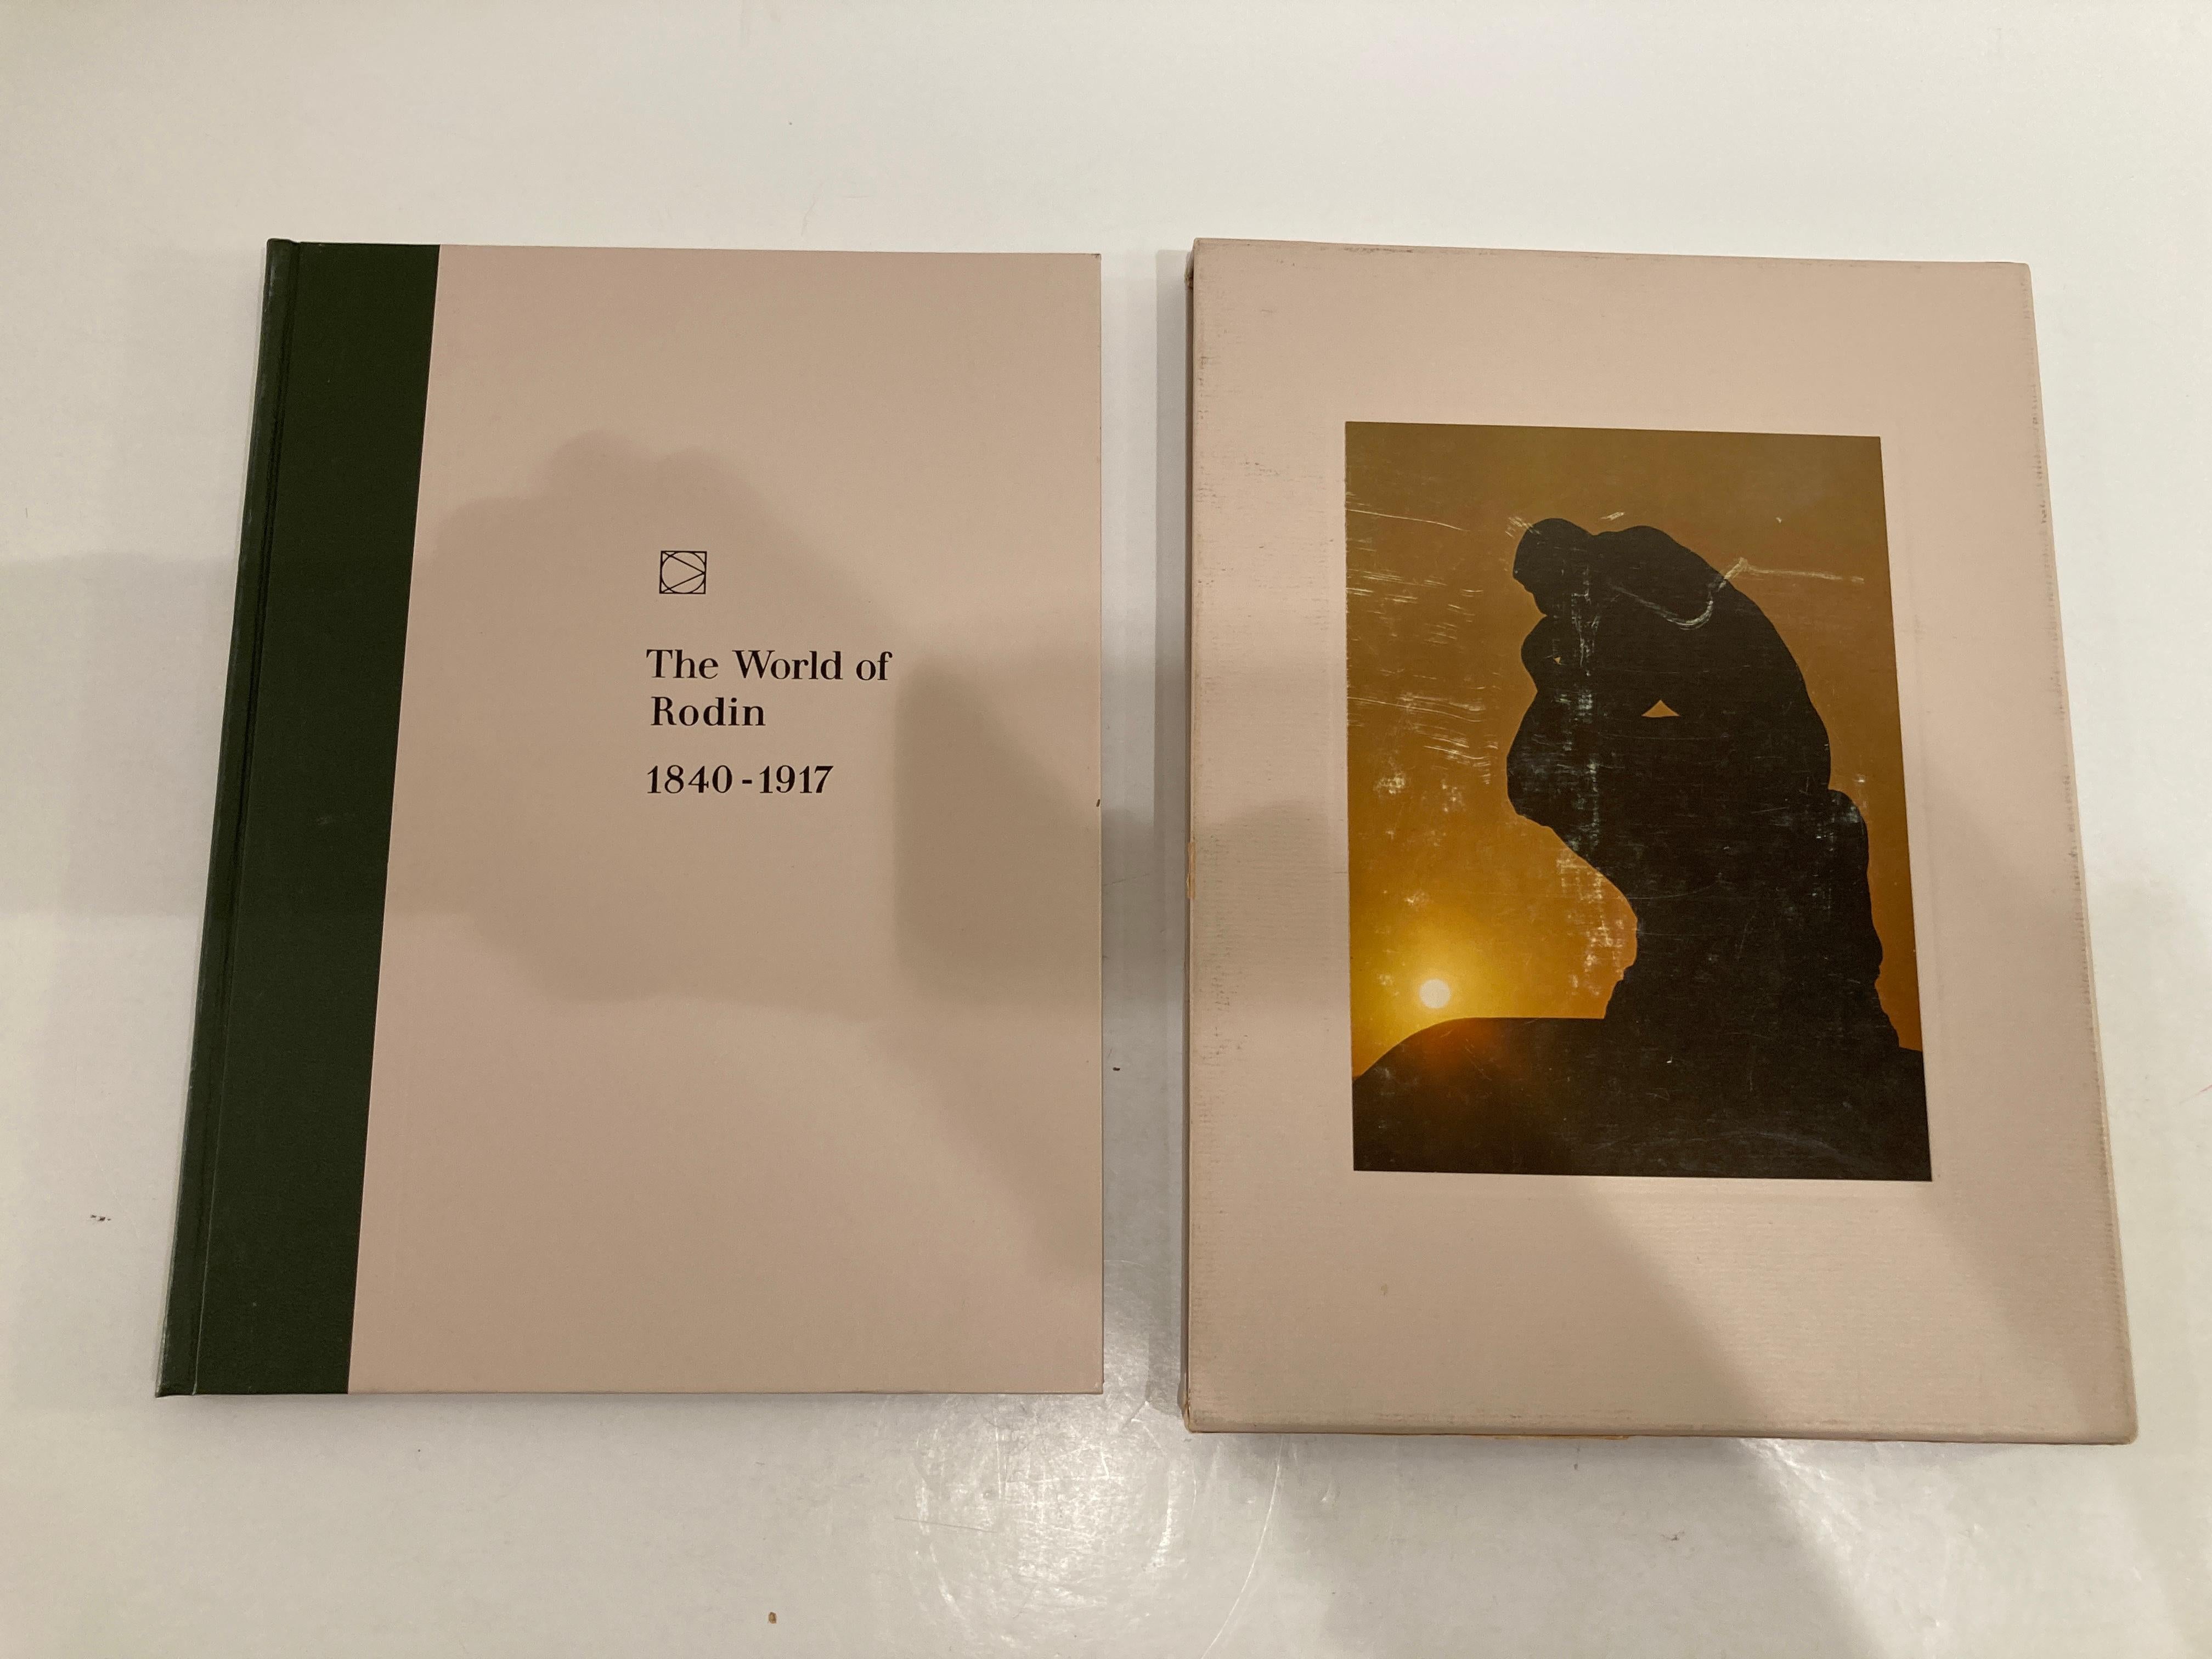 The World of Rodin by William Harlan Hale, published in 1976 by Time Life, USA.
The World of Rodin 1840-1917 Hardcover With Slipcase Time Life Vintage Book.
192 pages, pictorial endpapers and numerous color plates and other illustrations. 
The